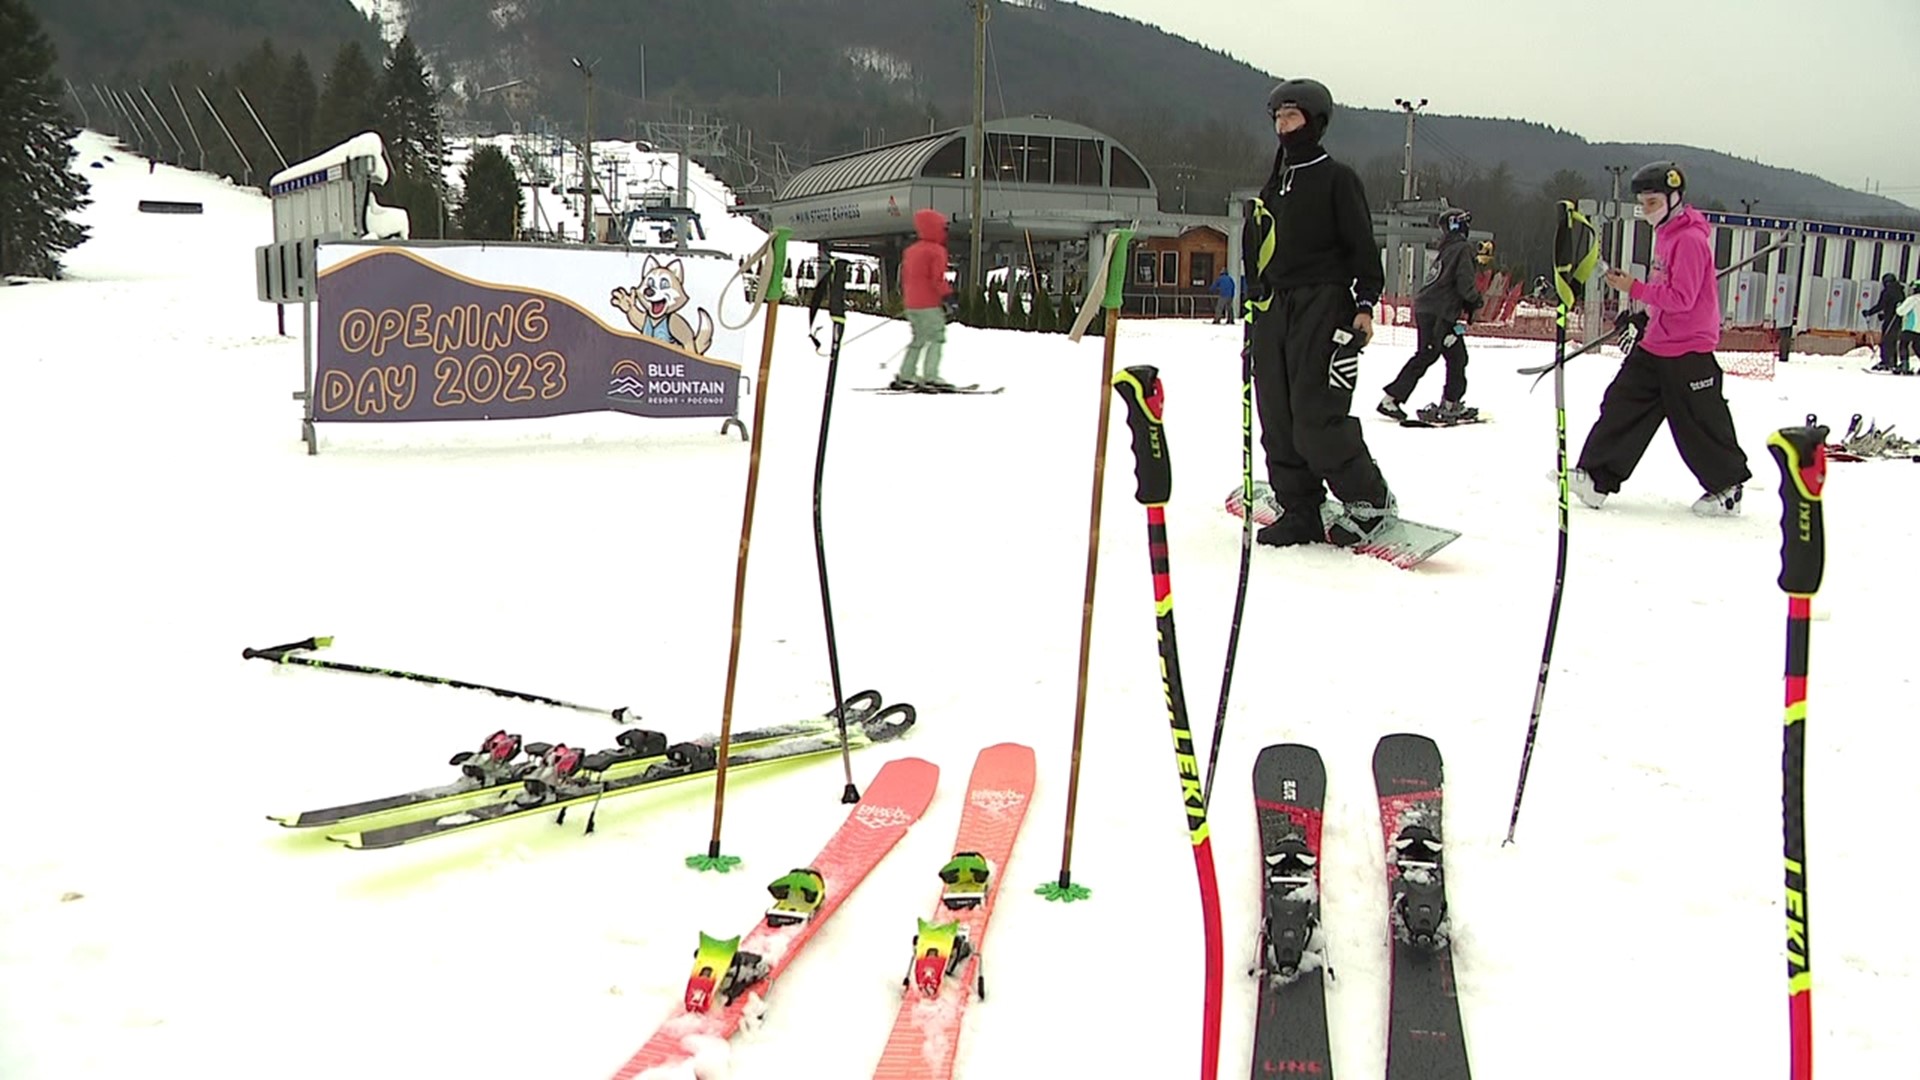 Skiers and snowboarders lined up Friday morning in the Poconos, ready to shred for the first time this season.